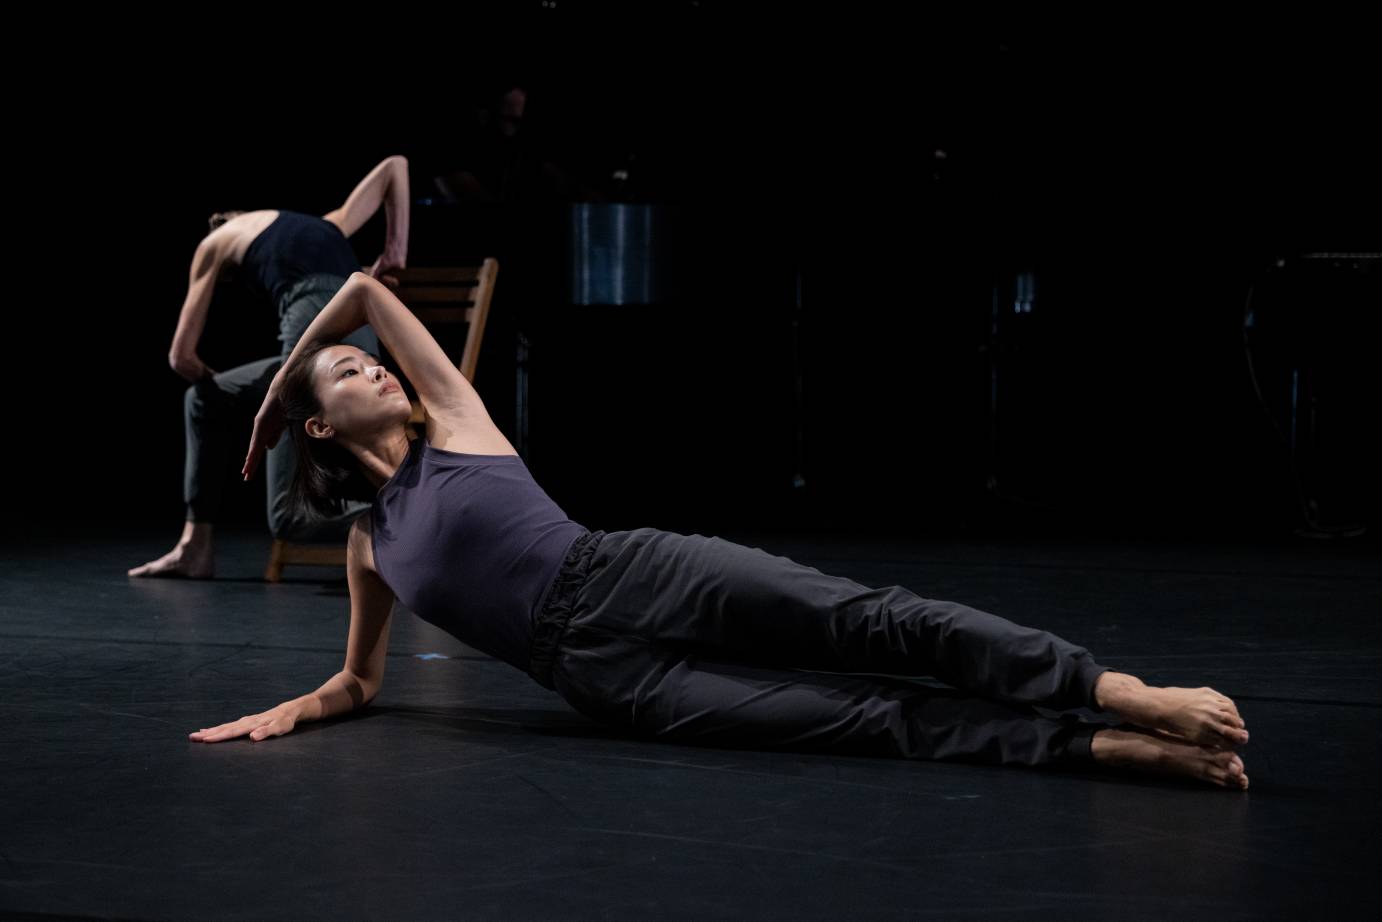 two female dancers, one in the foreground in a grey leotard and semi-fitted sweats holds an angular pose lying on her side the floor,the dancer in the background, dressed similarly sits on a chair huddled over her back faces us